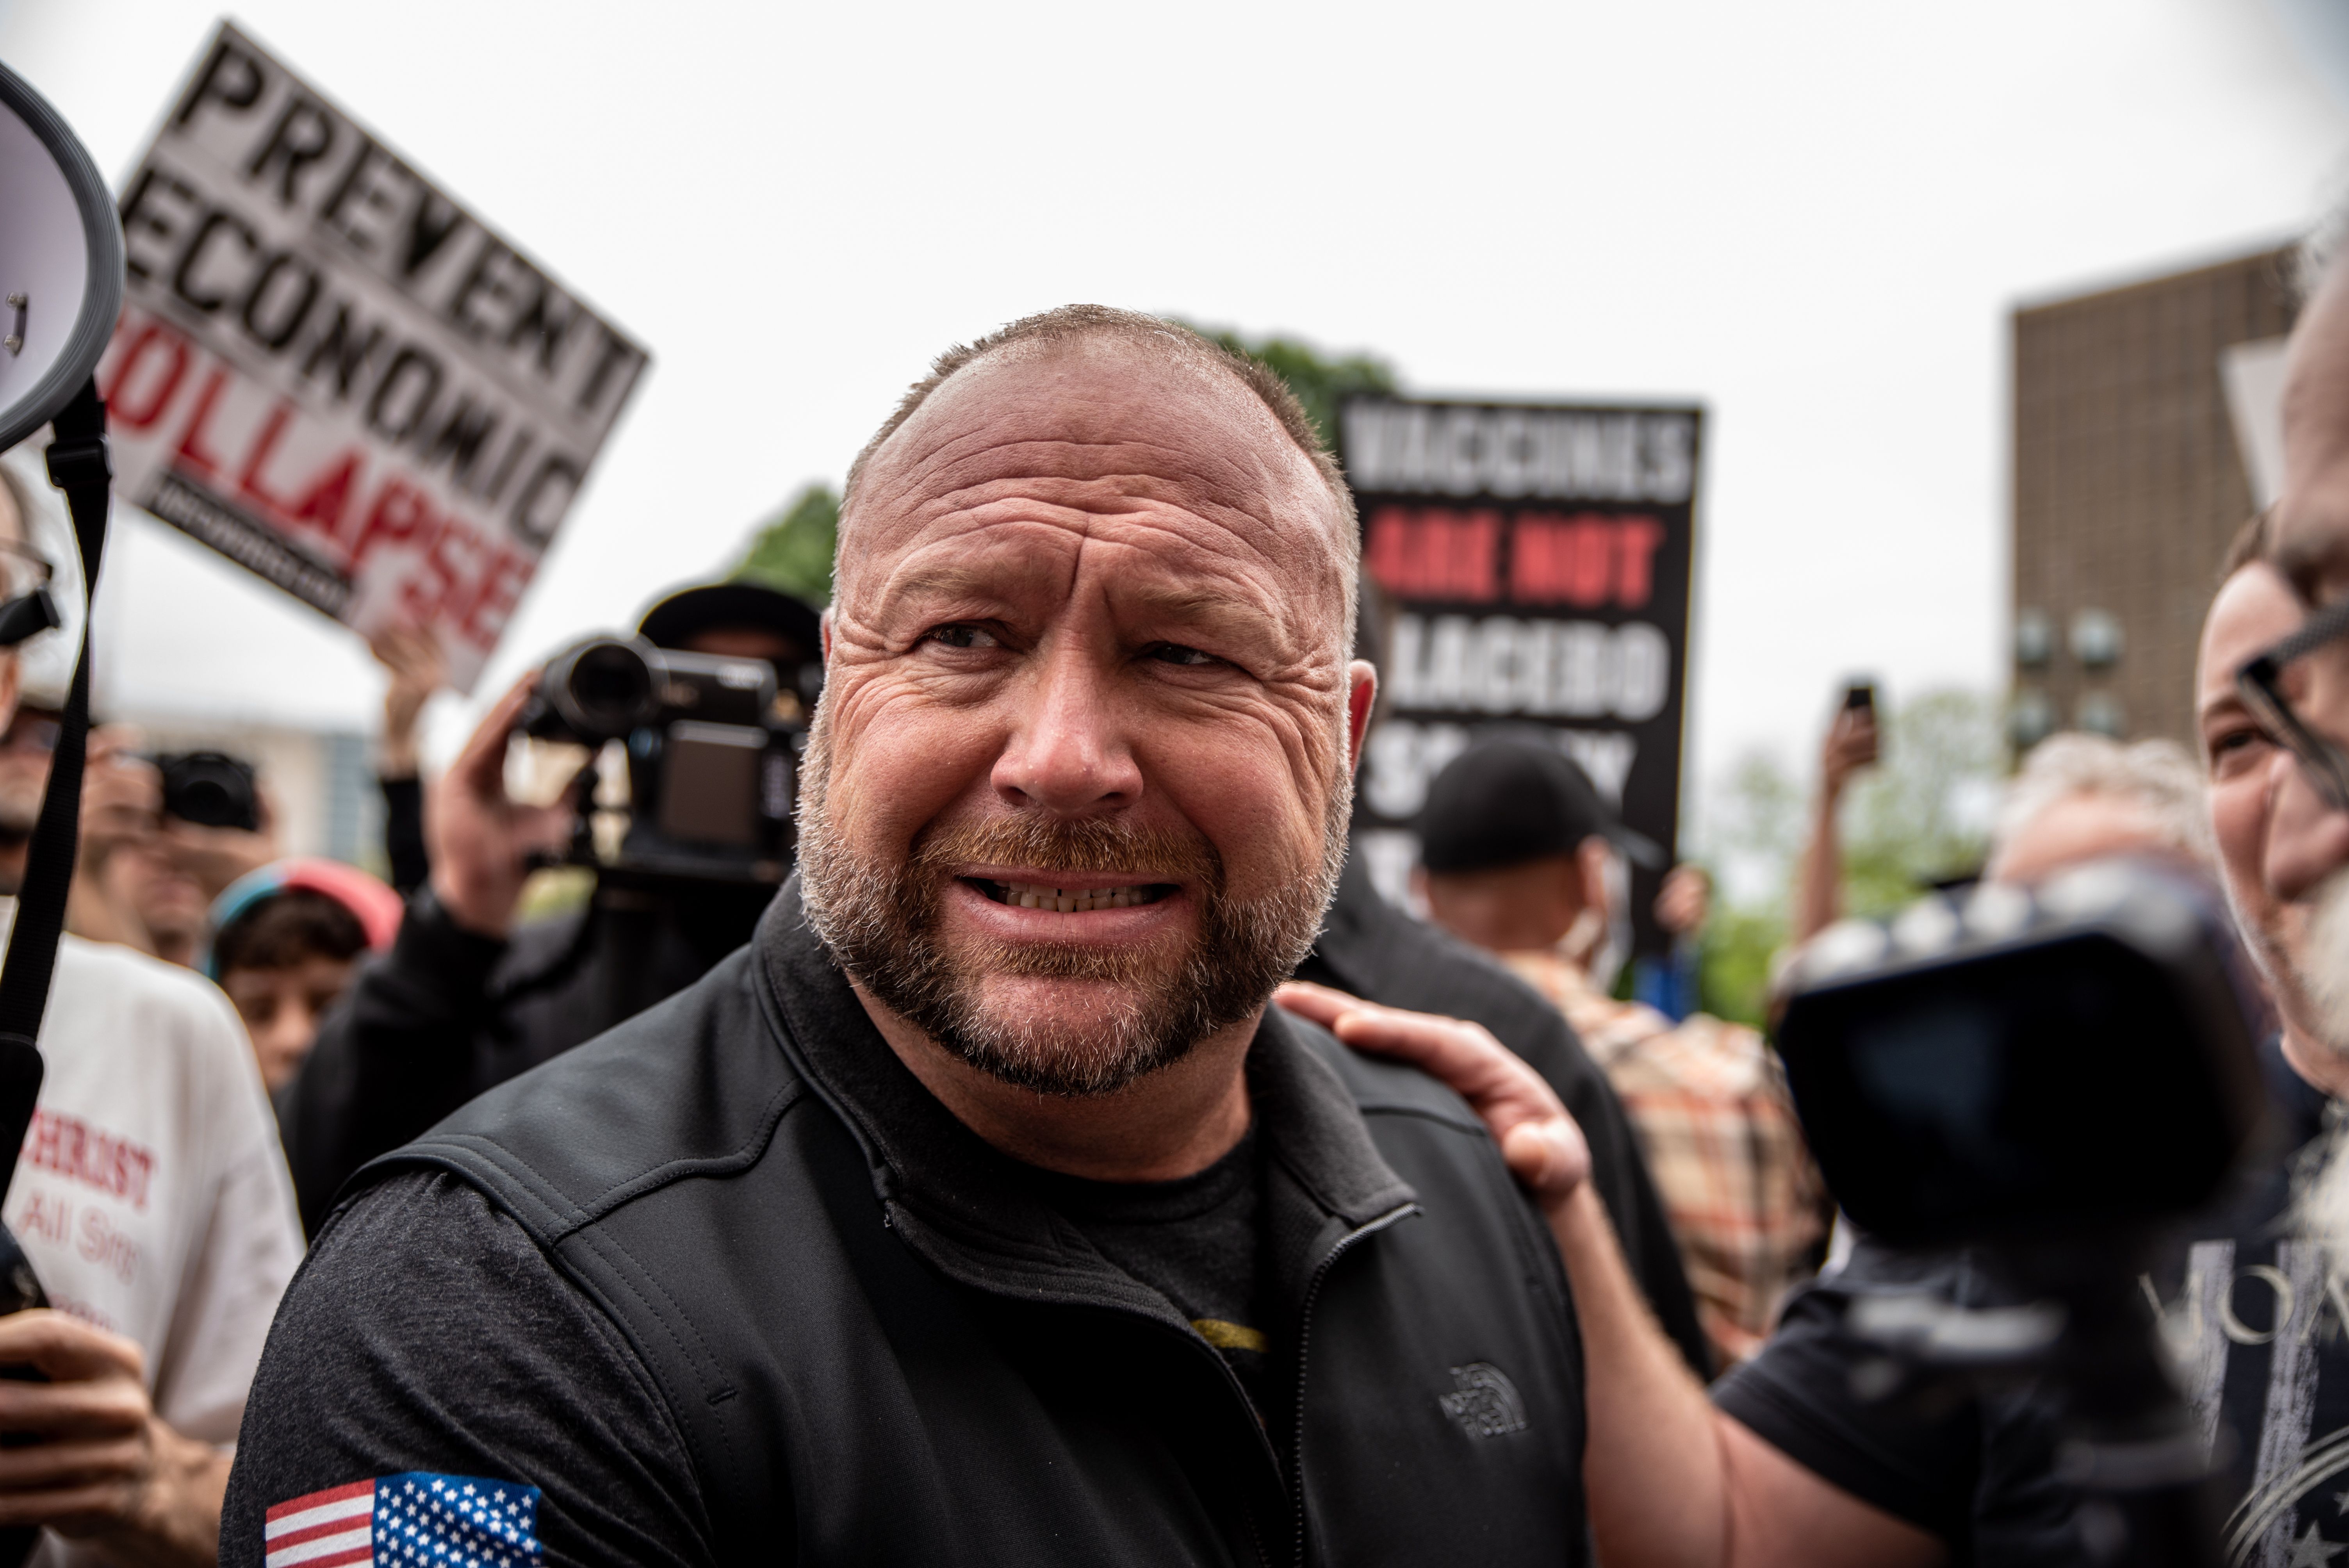 Alex Jones has been pictured over the past year at protests calling for the country to be opened up despite the COVID-19 pand